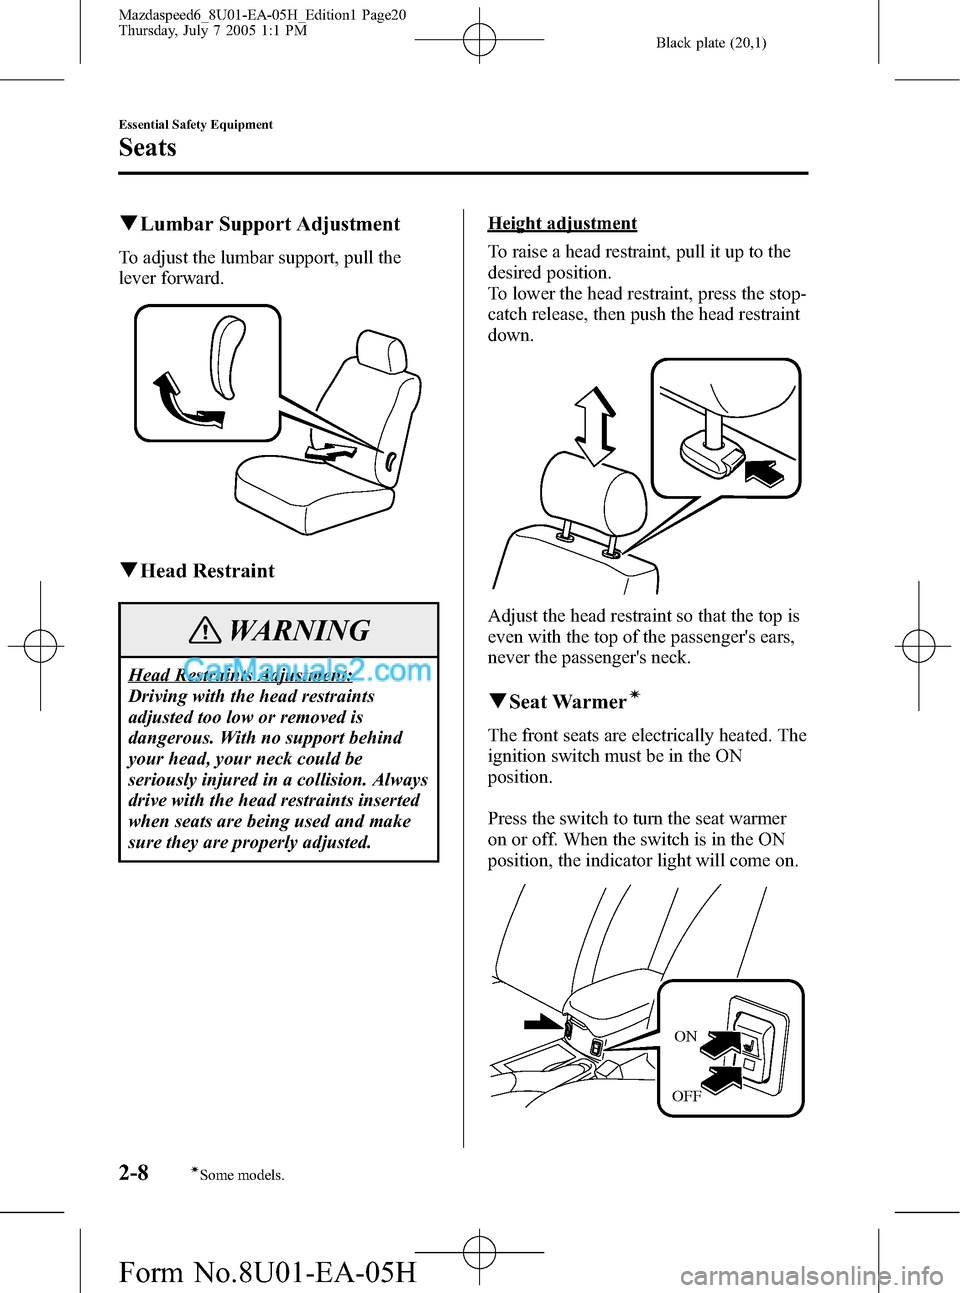 MAZDA MODEL MAZDASPEED 6 2006   (in English) User Guide Black plate (20,1)
qLumbar Support Adjustment
To adjust the lumbar support, pull the
lever forward.
qHead Restraint
WARNING
Head Restraints Adjustment:
Driving with the head restraints
adjusted too lo